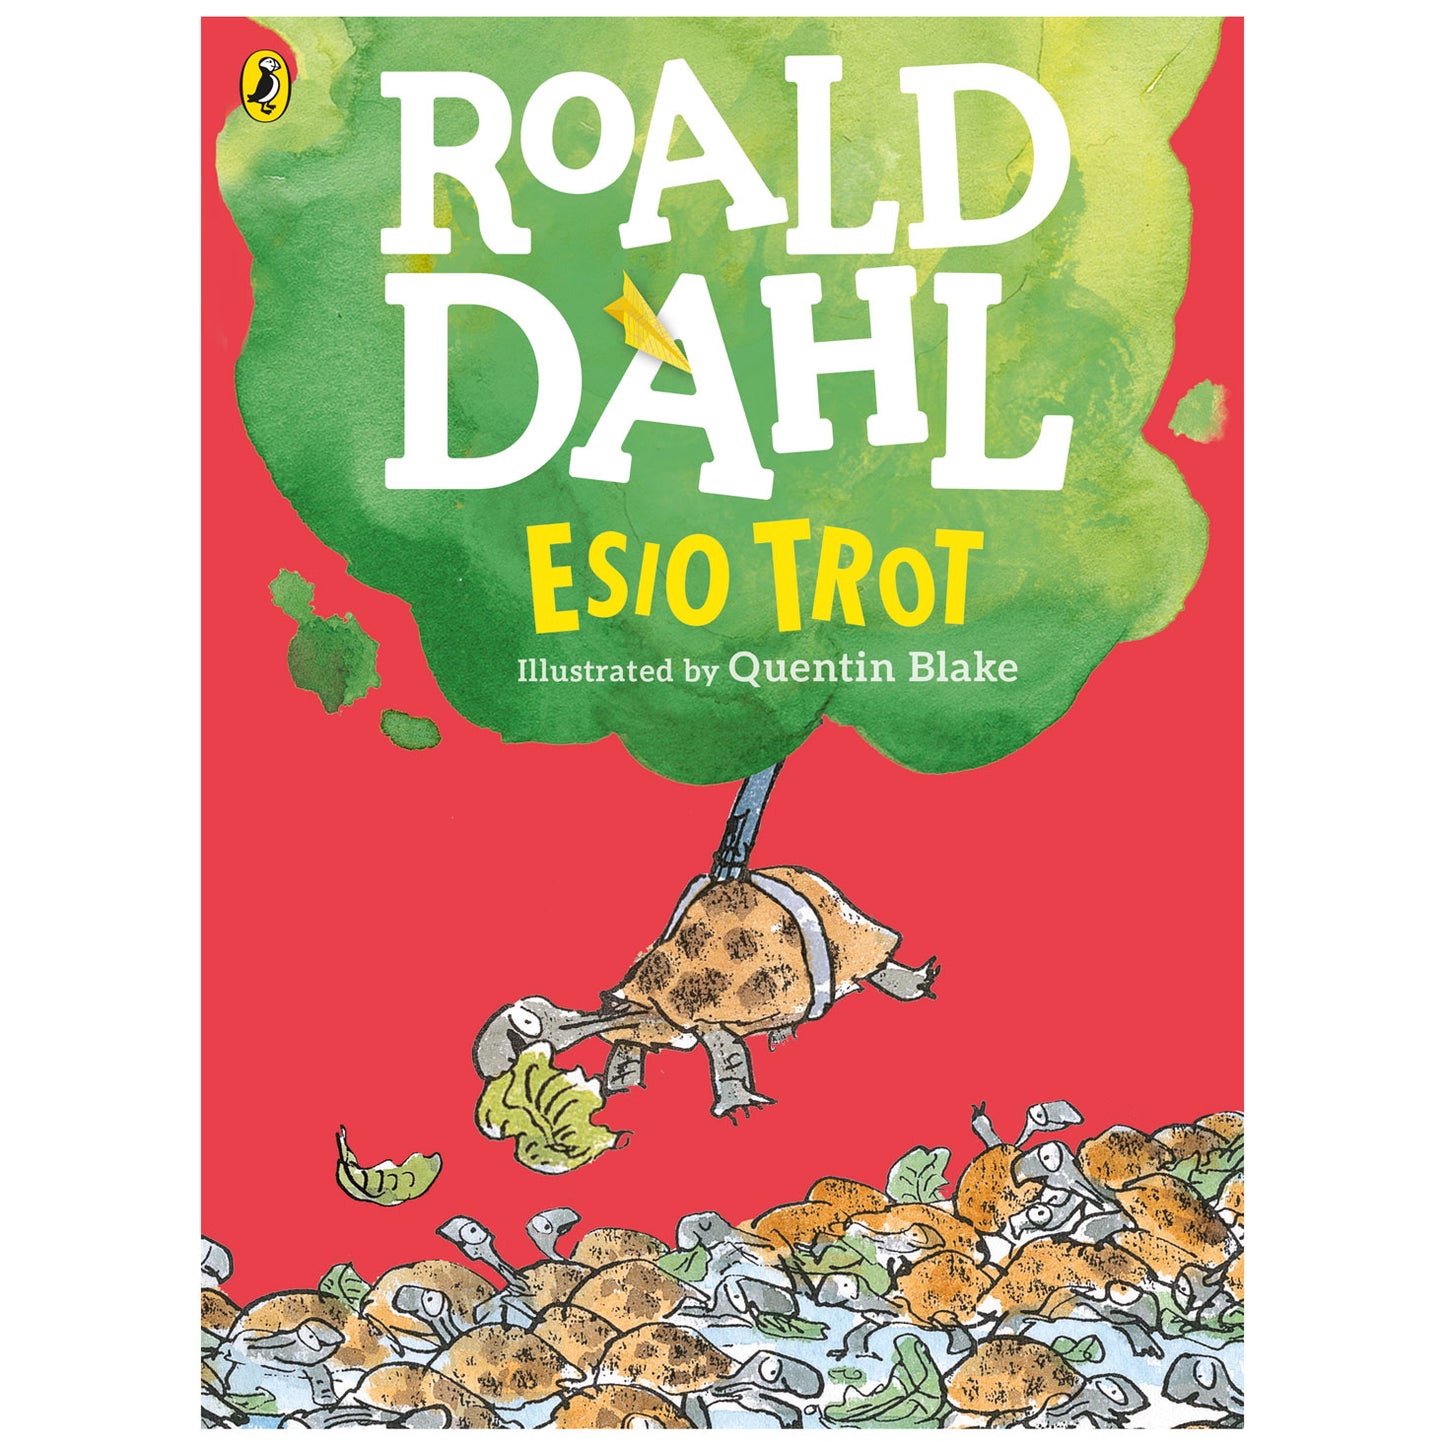 Esio Trot by Roald Dahl with illustrations by Quentin Blake